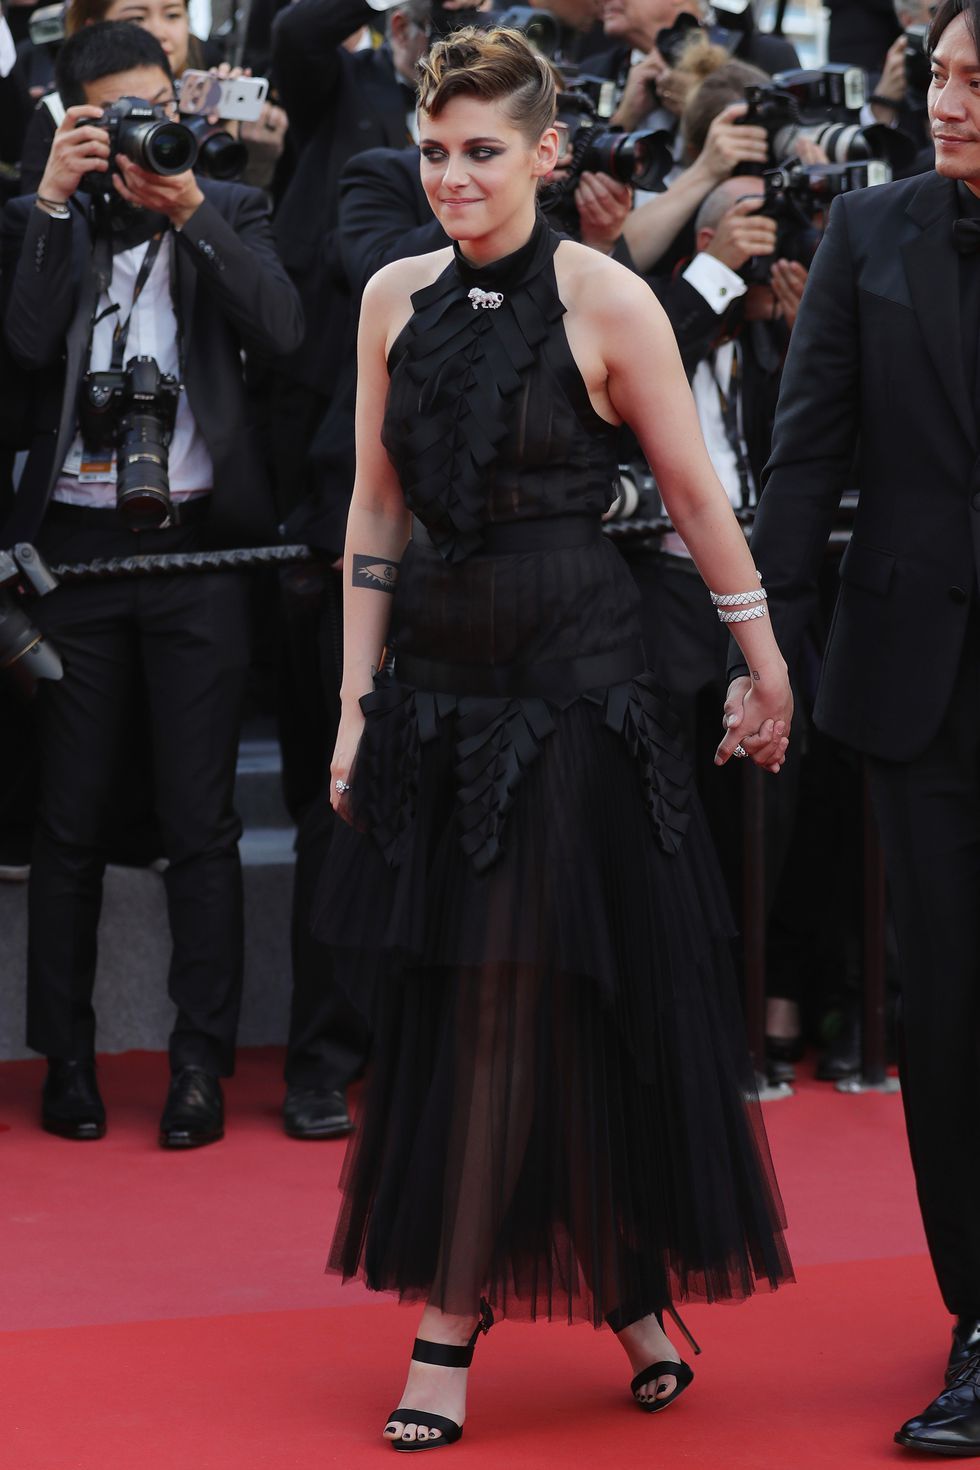 Kristen Stewart opted for a Chanel Tulle creation